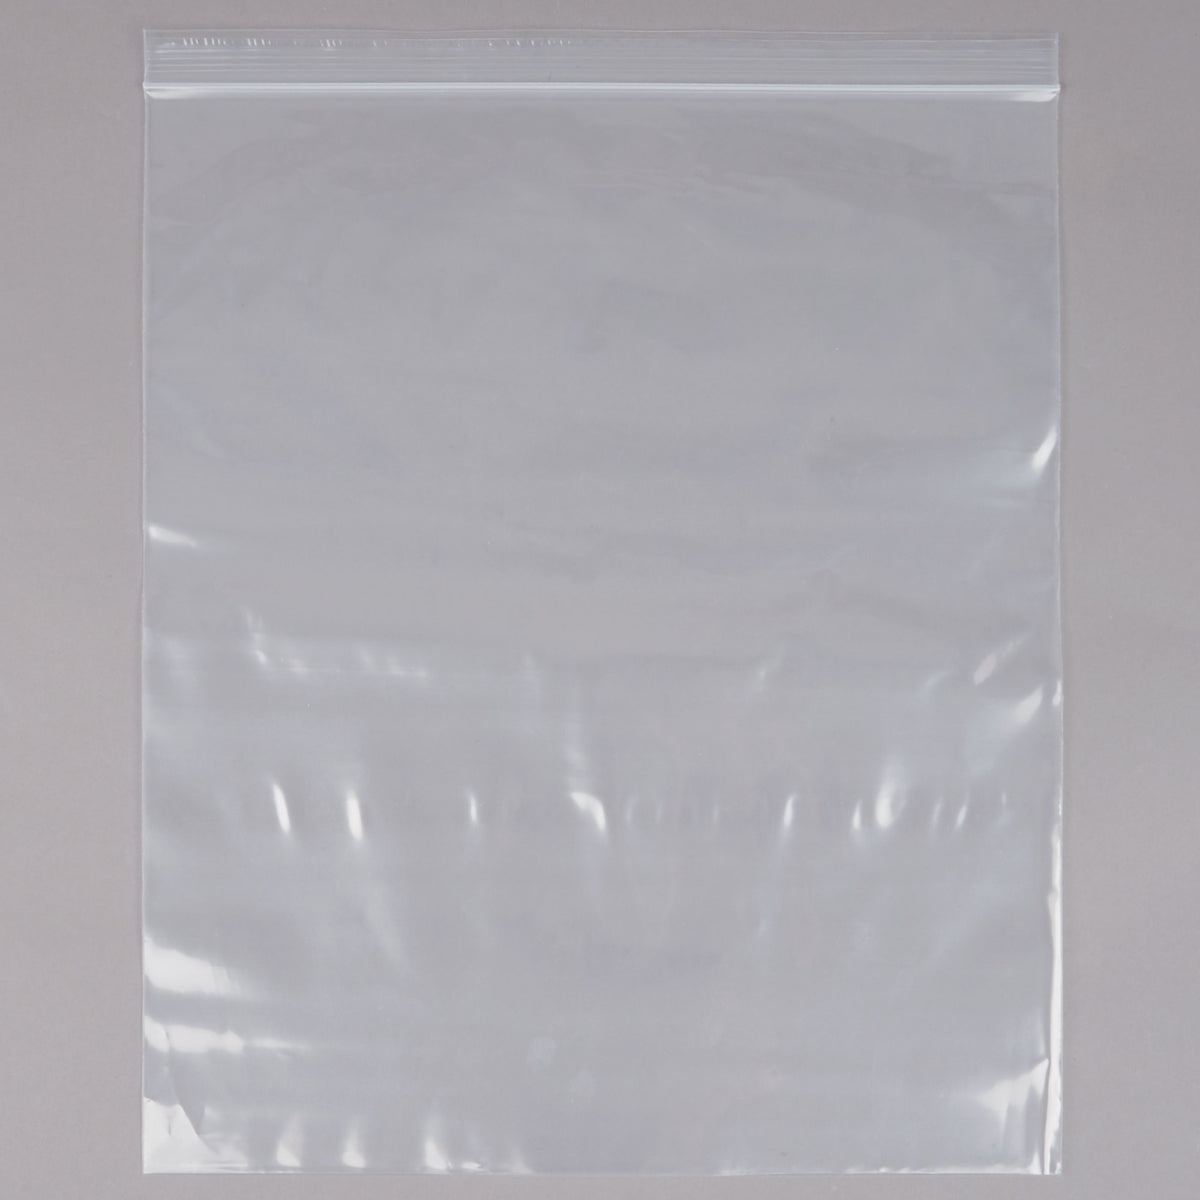 Pack of 100 Large Ziplock Bags 13 x 15 - 2 Mil - Plastic Bags with Zipper